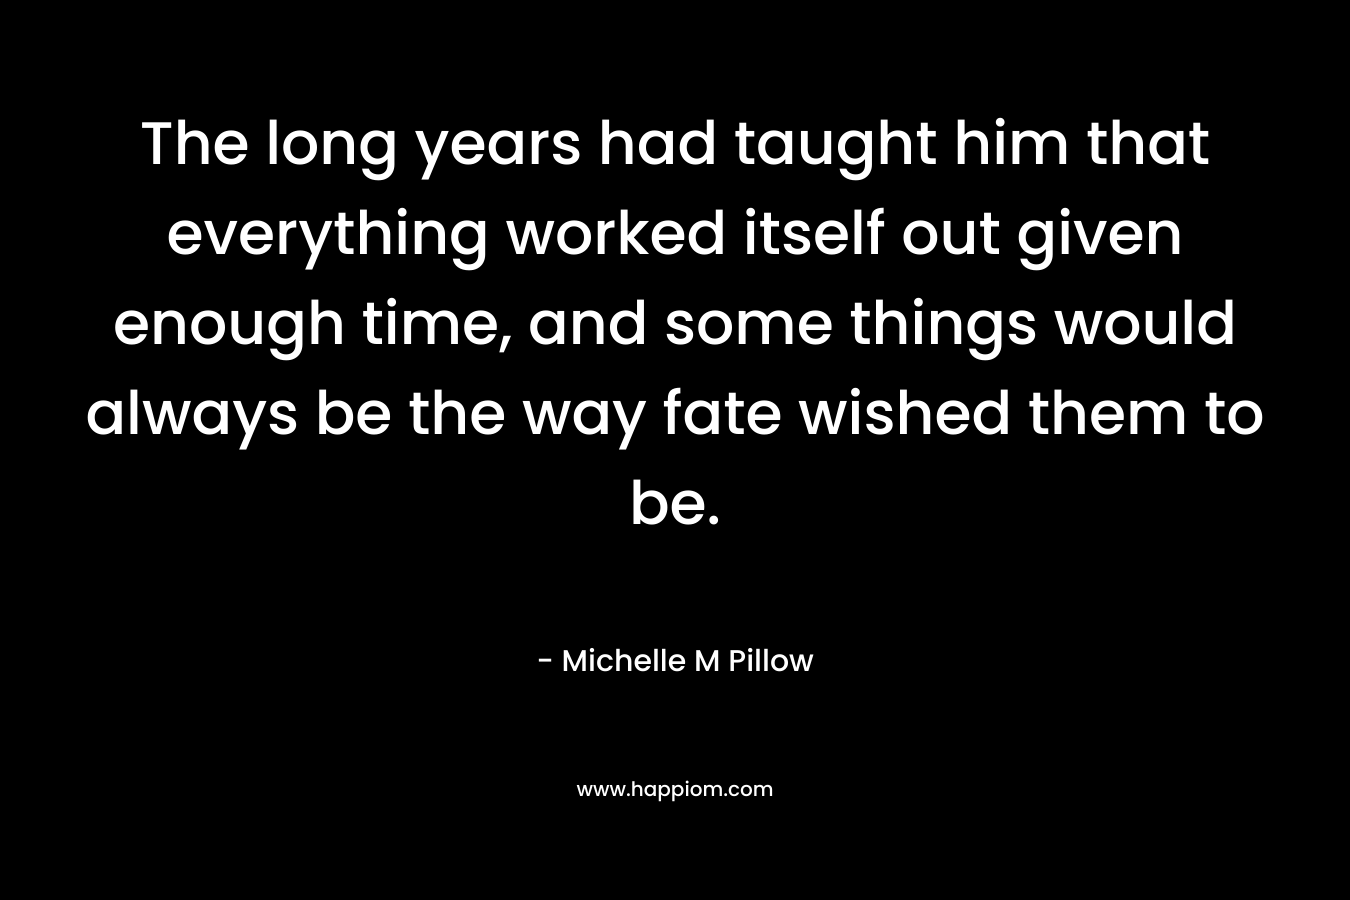 The long years had taught him that everything worked itself out given enough time, and some things would always be the way fate wished them to be. – Michelle M Pillow